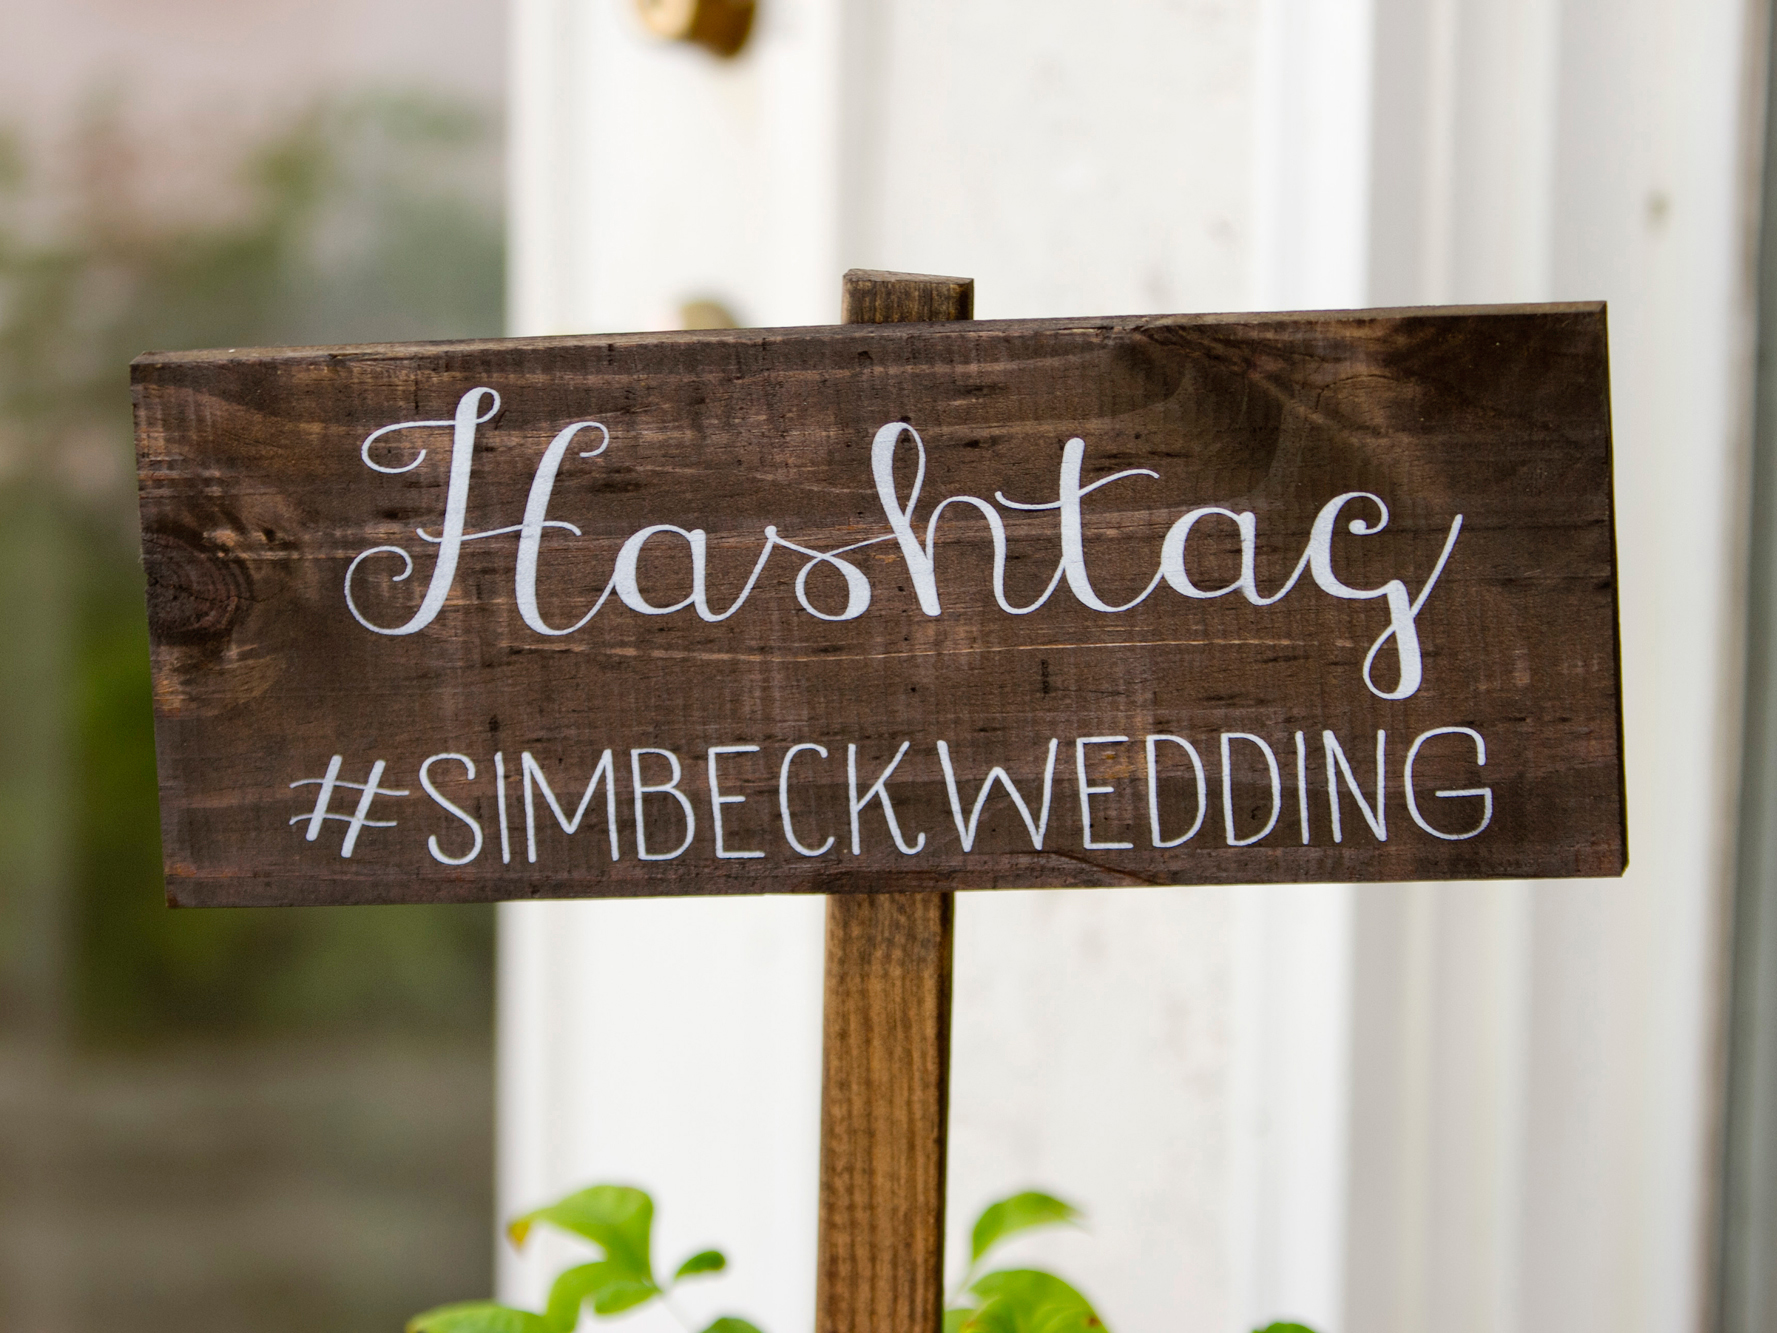 Effective Tips For Lovely Wedding Hastags